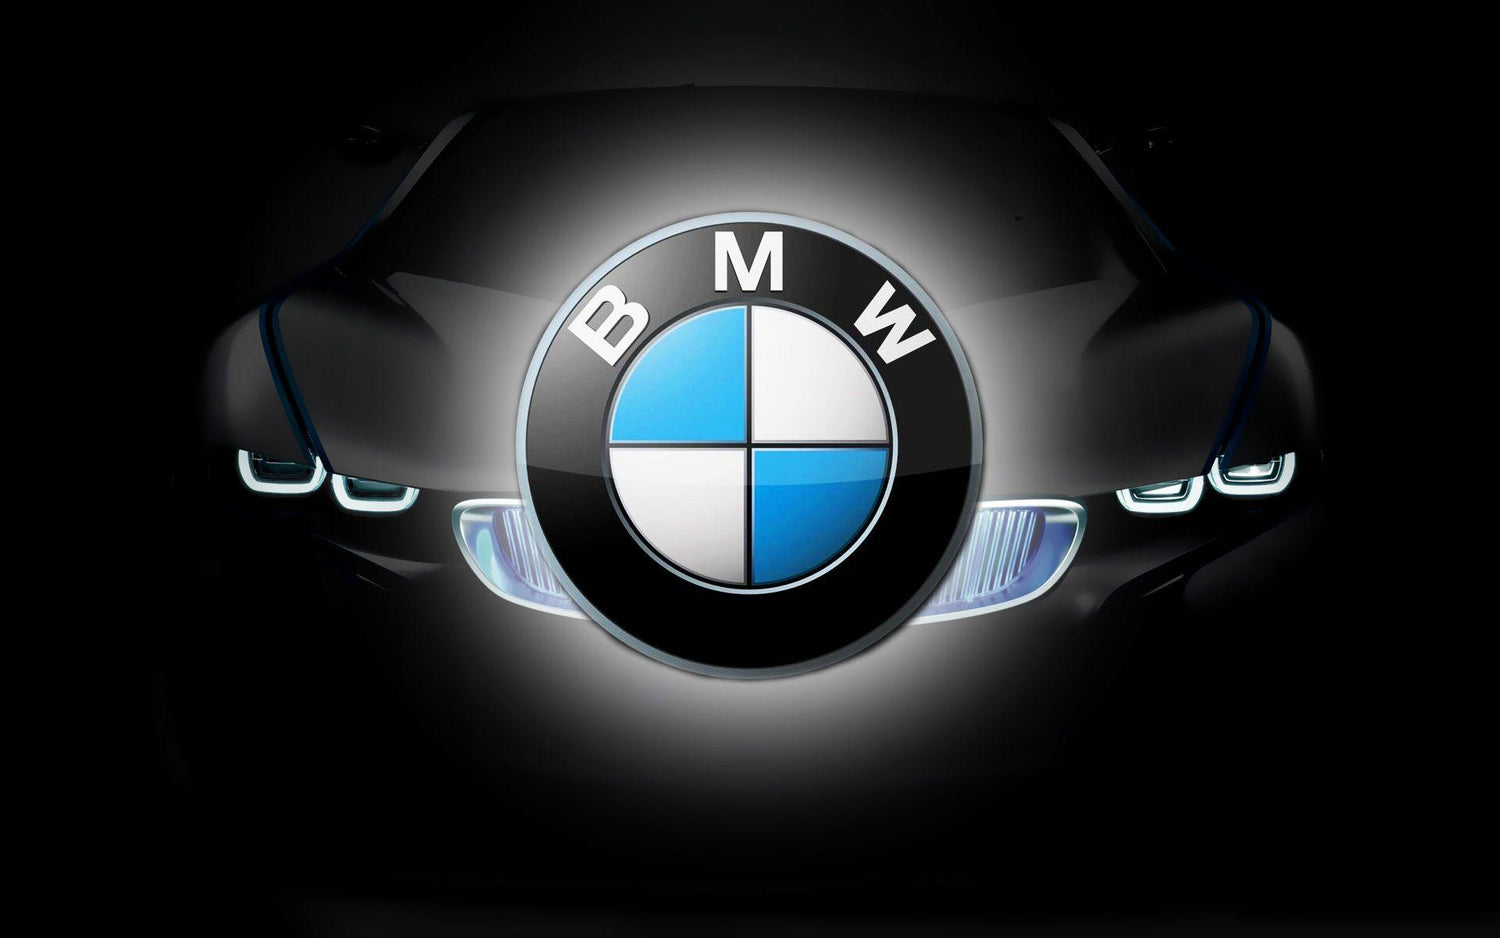 BMW | Electric Car Charger EV Cables for BMW type 1, type 2 and Portable Charging Cables